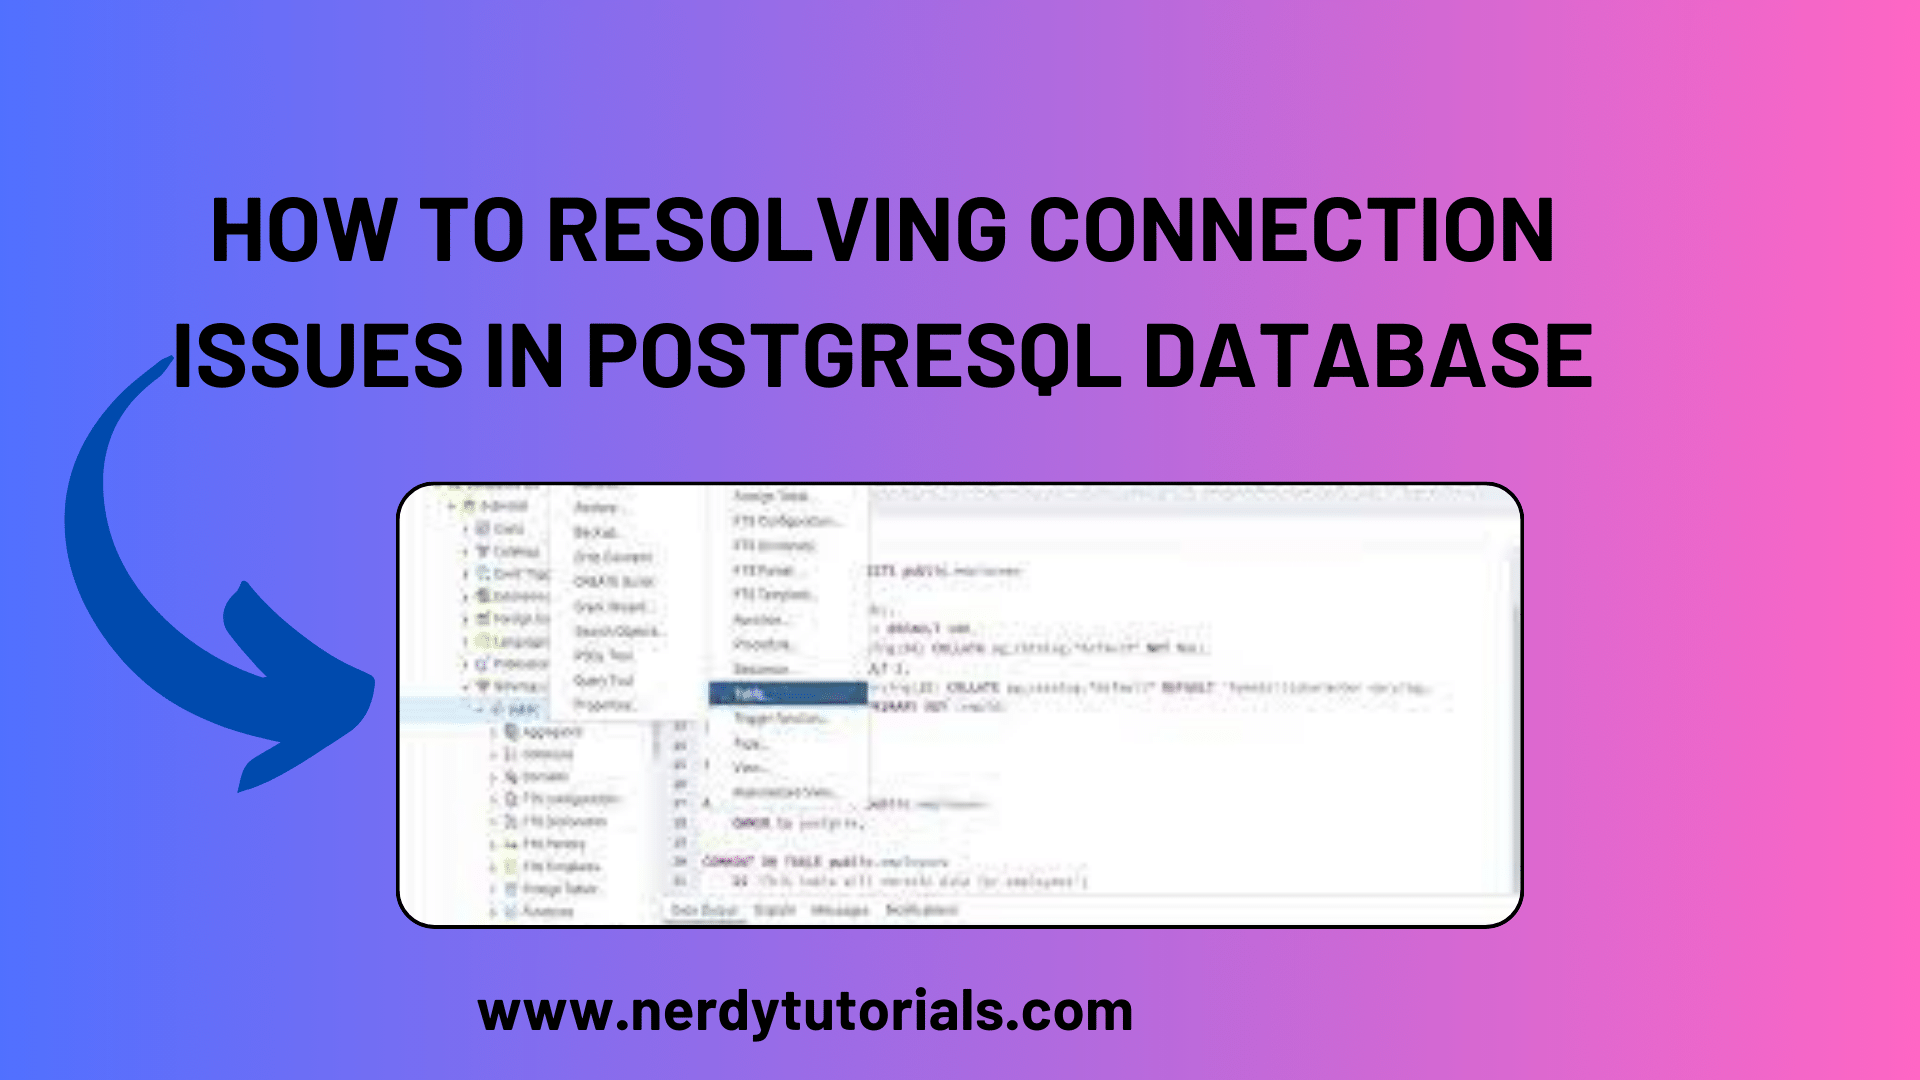 How To Resolving Connection Issues in PostgreSQL Database